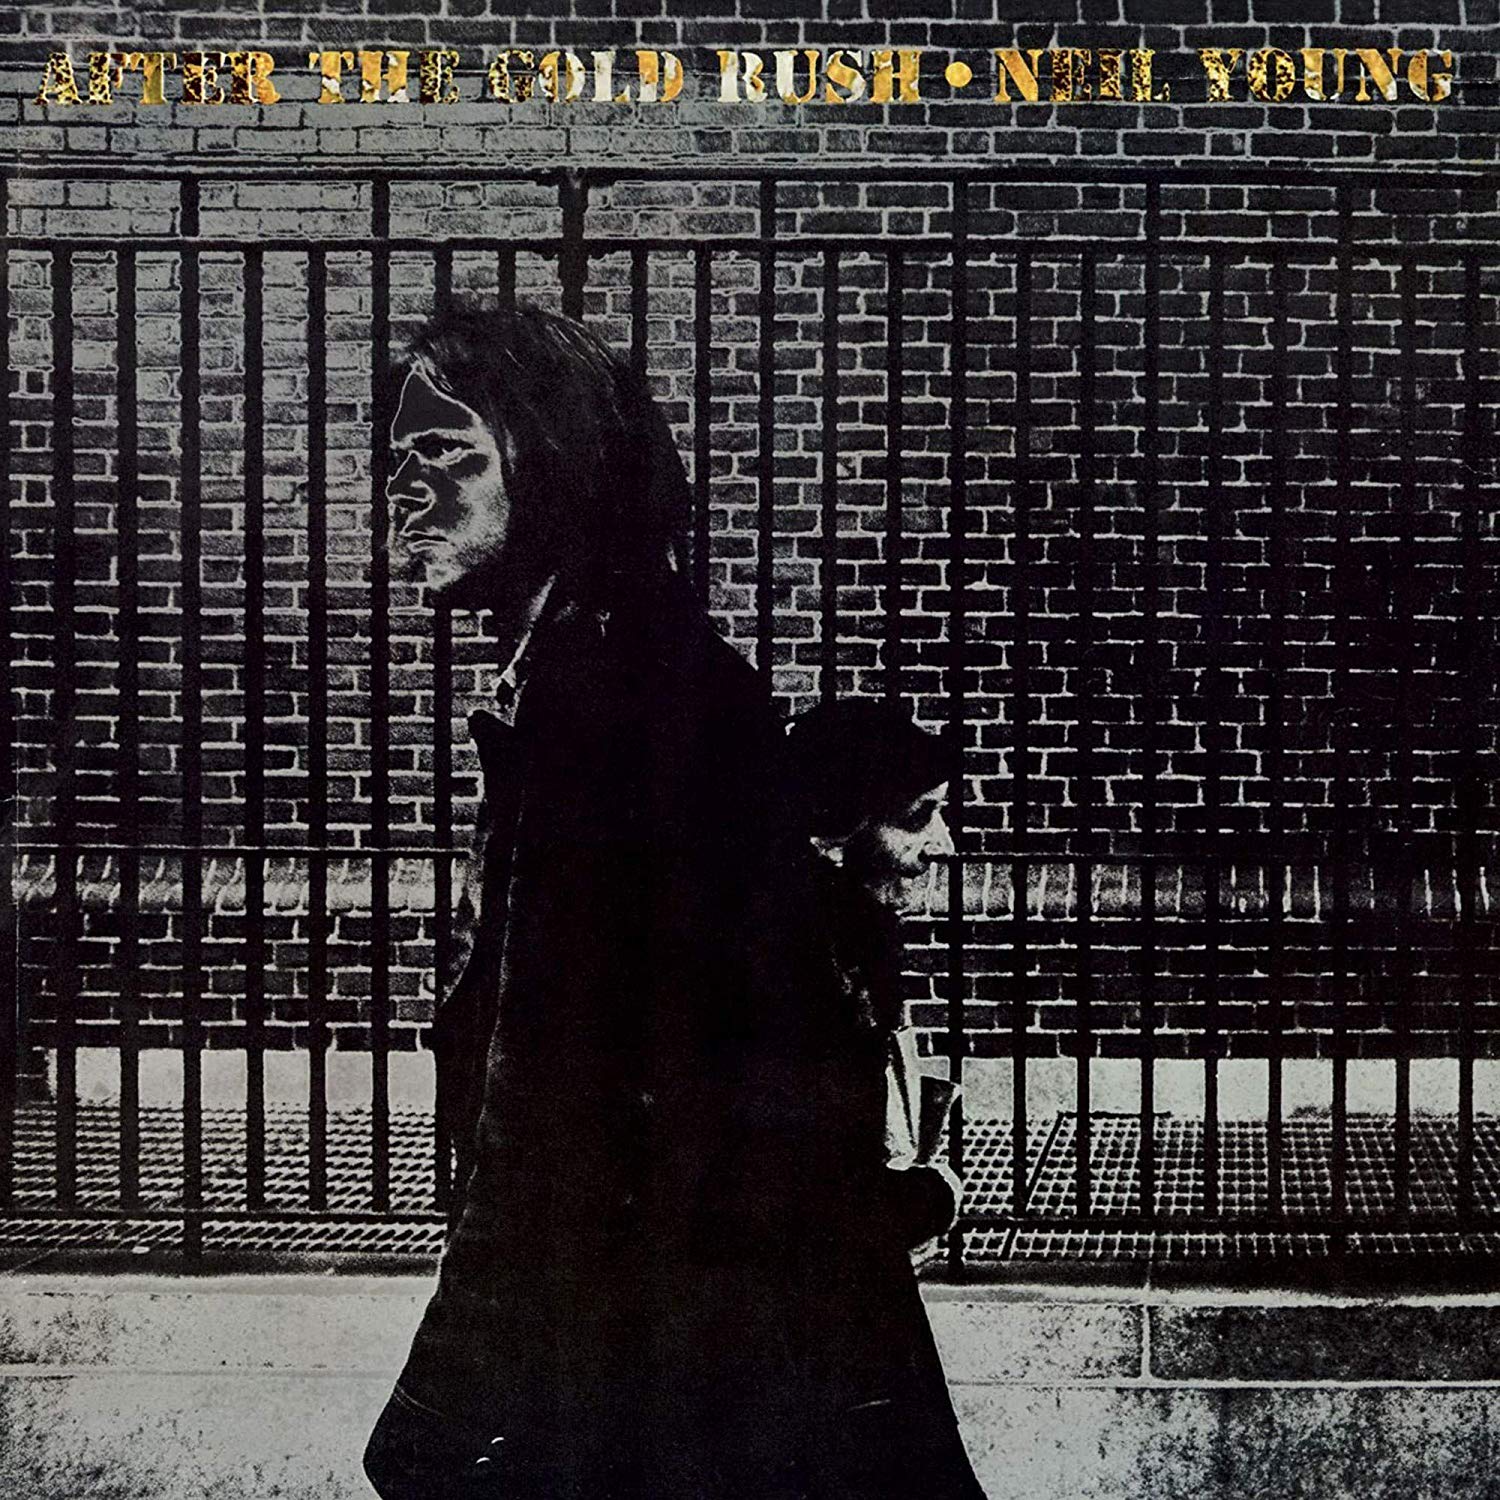 Albumcover: Neil Young
"After The Goldrush"